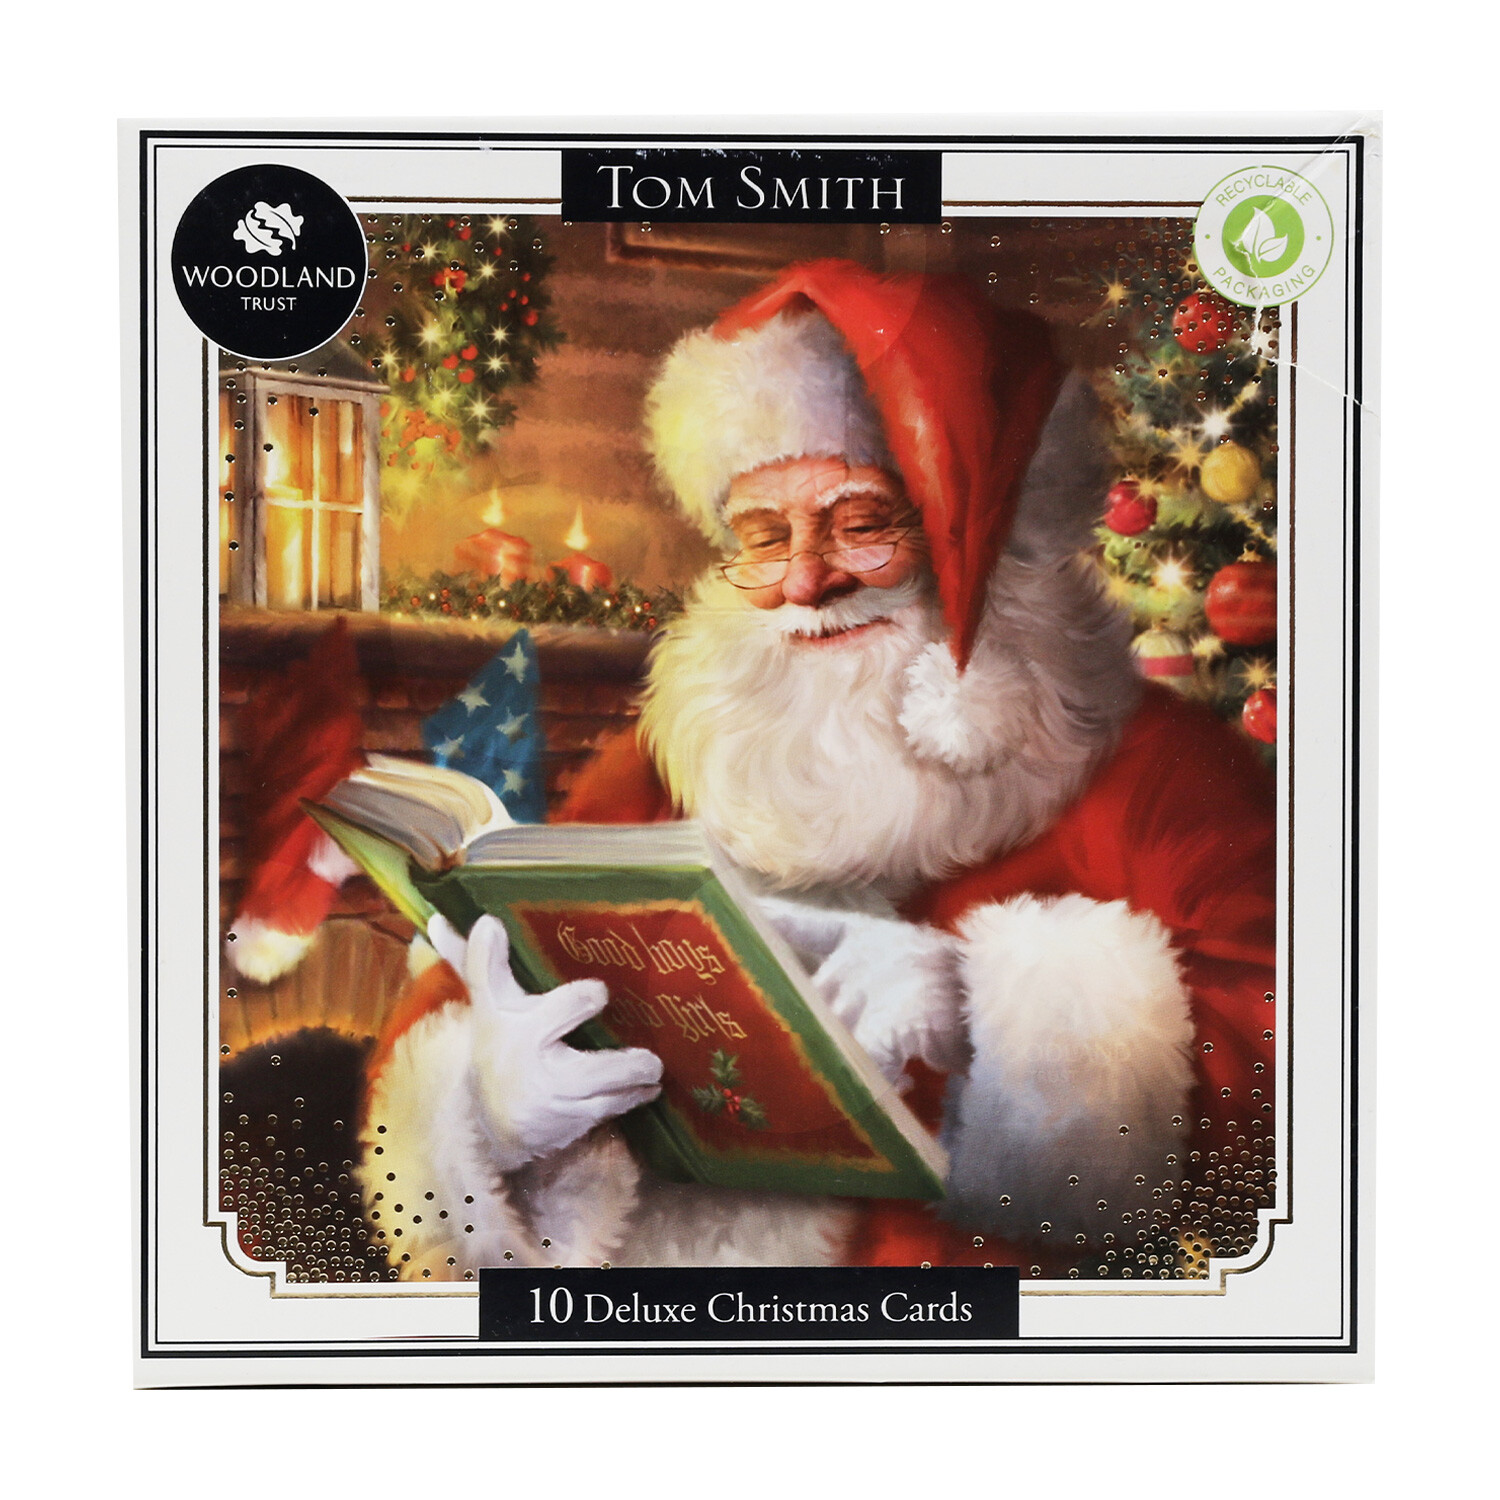 Deluxe Santa Christmas Cards Image